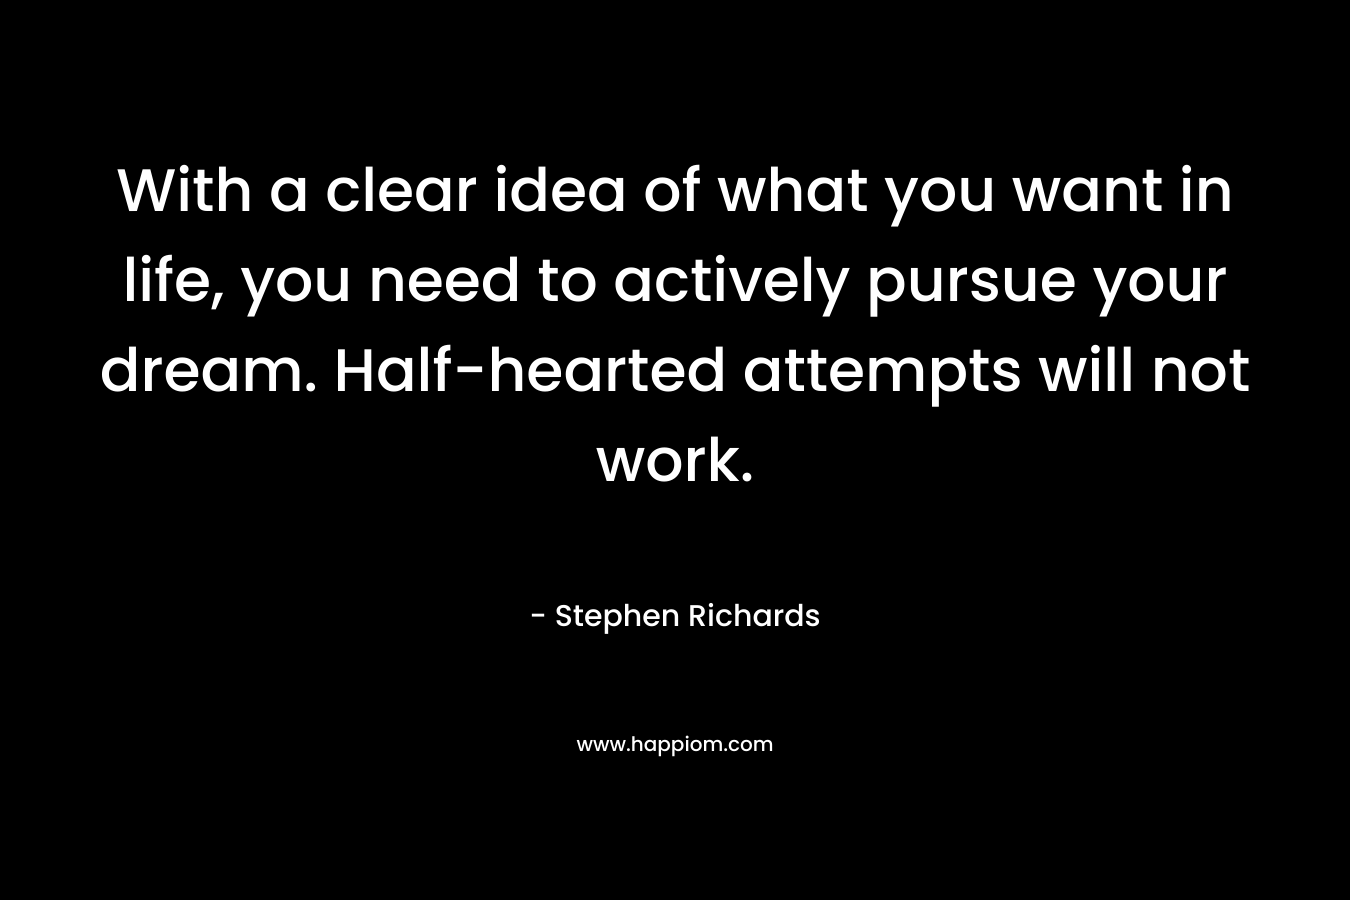 With a clear idea of what you want in life, you need to actively pursue your dream. Half-hearted attempts will not work.